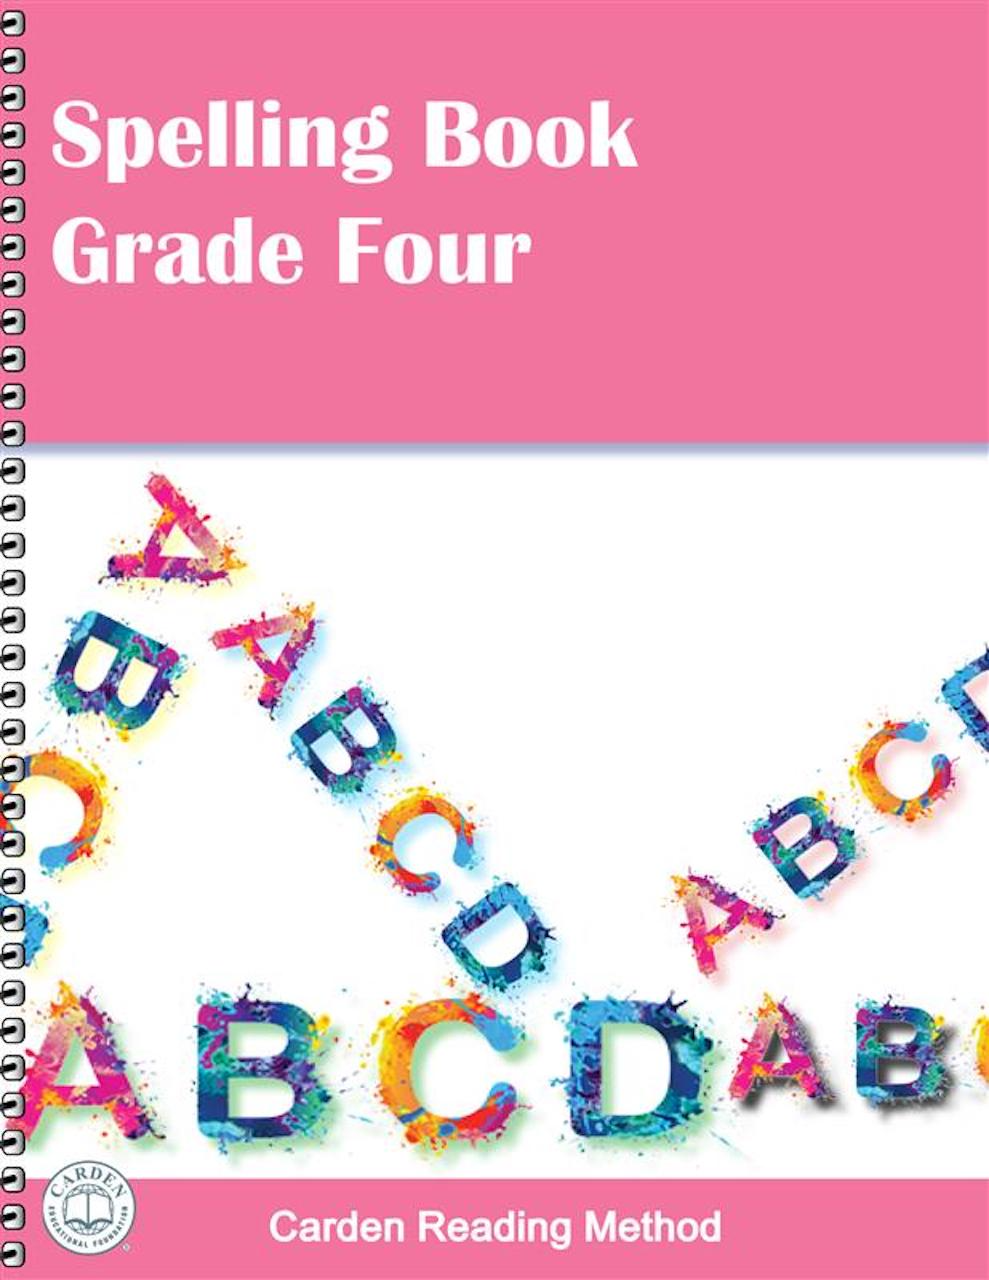 pearson education spelling practice book grade 4 answer key